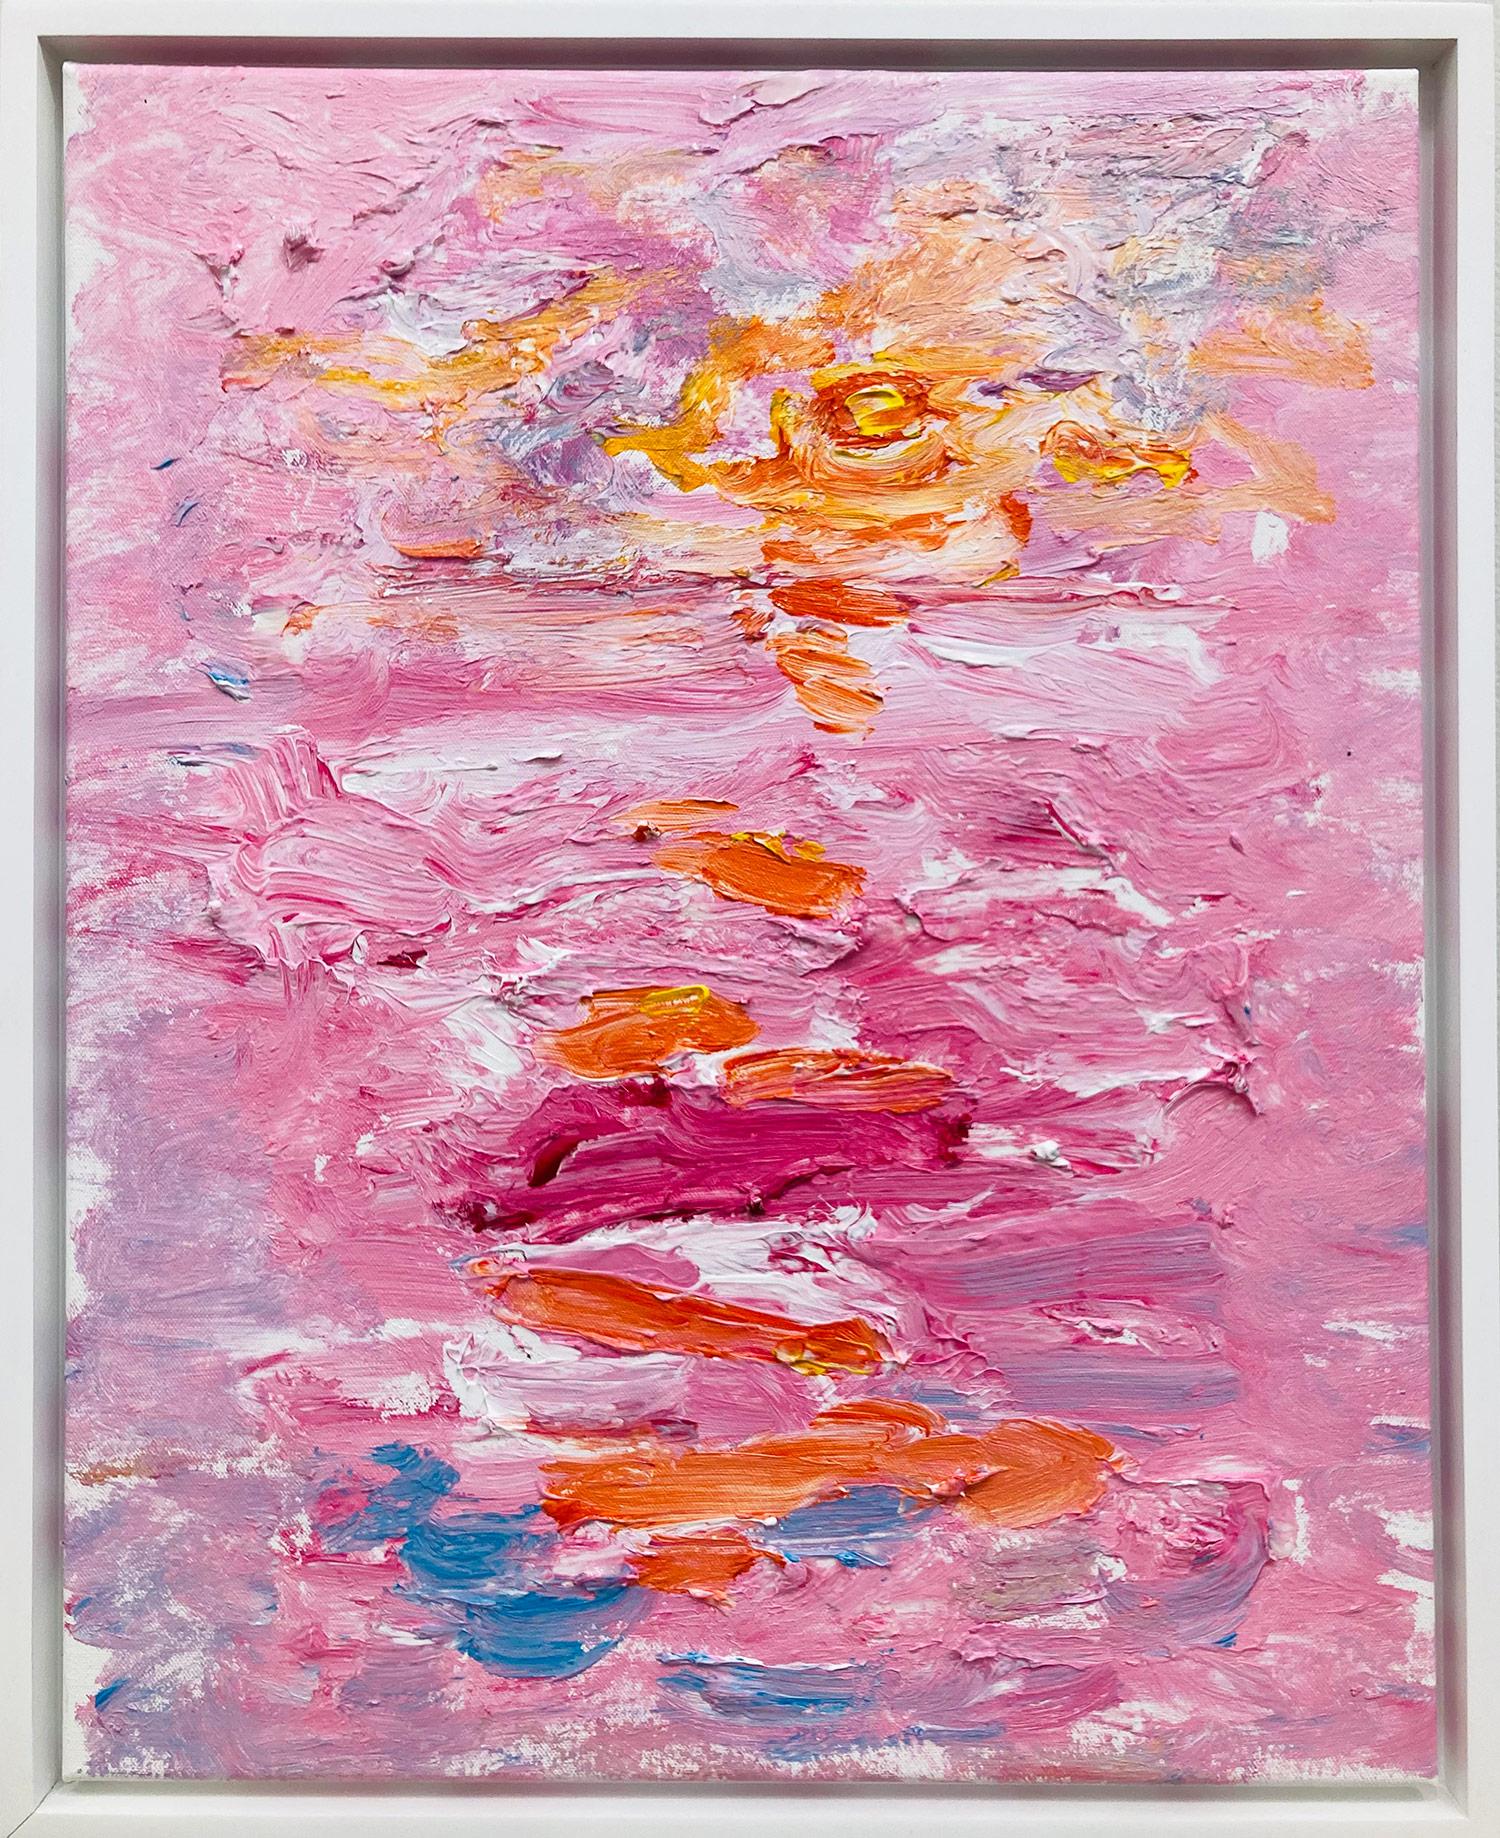 Robert Gregory Phillips Abstract Painting - "Flaming Sun Over Water" Contemporary Acrylic Painting in the style of Monet